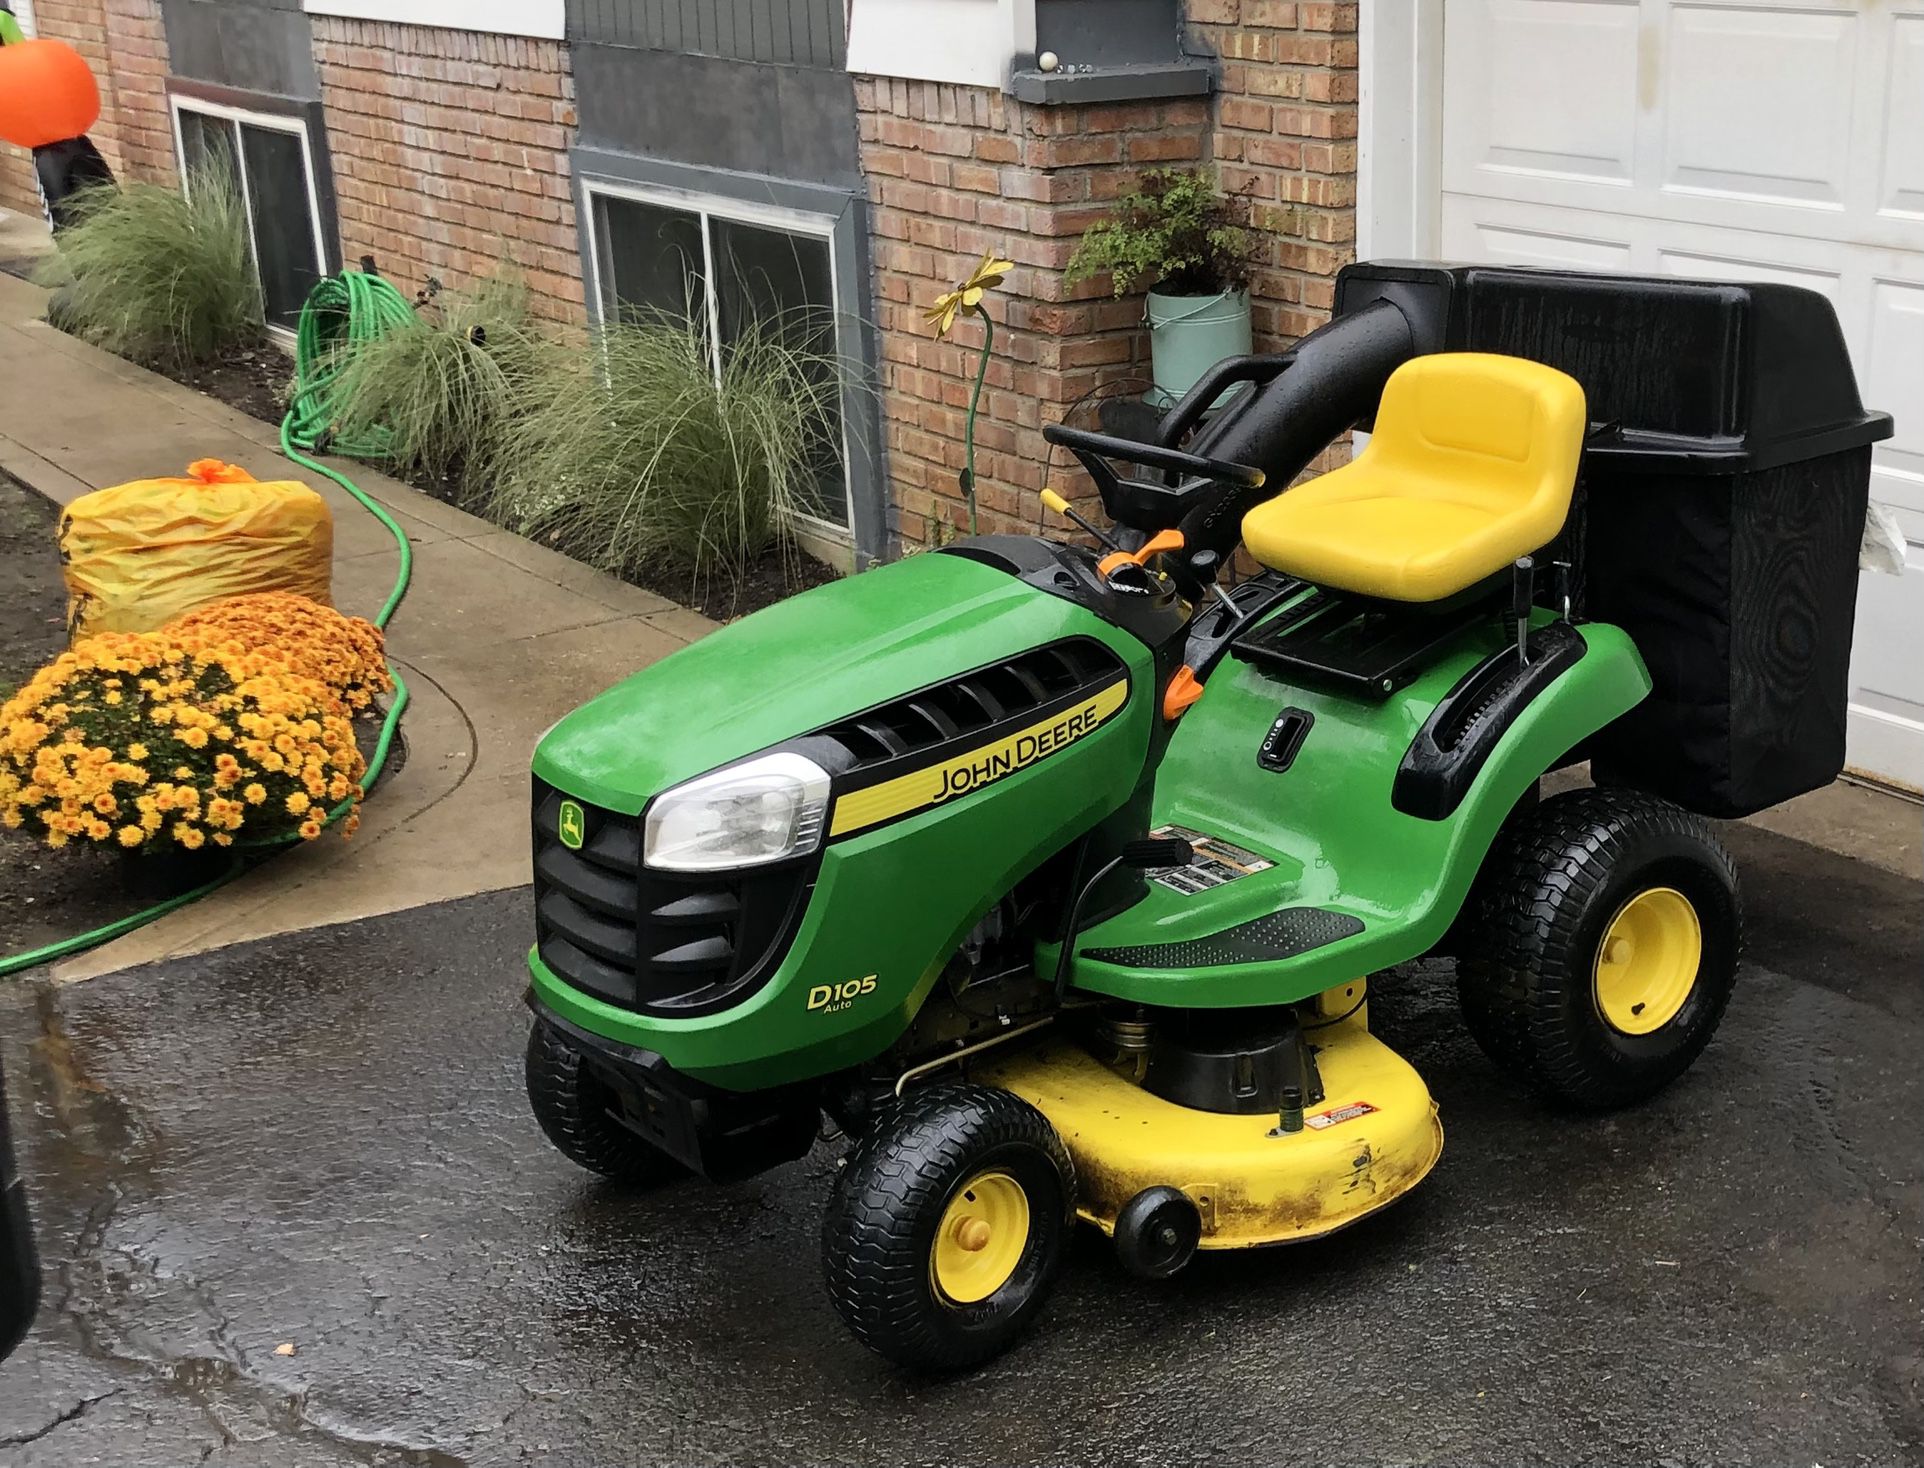 2018 48” John Deere Lawn Mower W/Double Bagger $850 DELIVERED